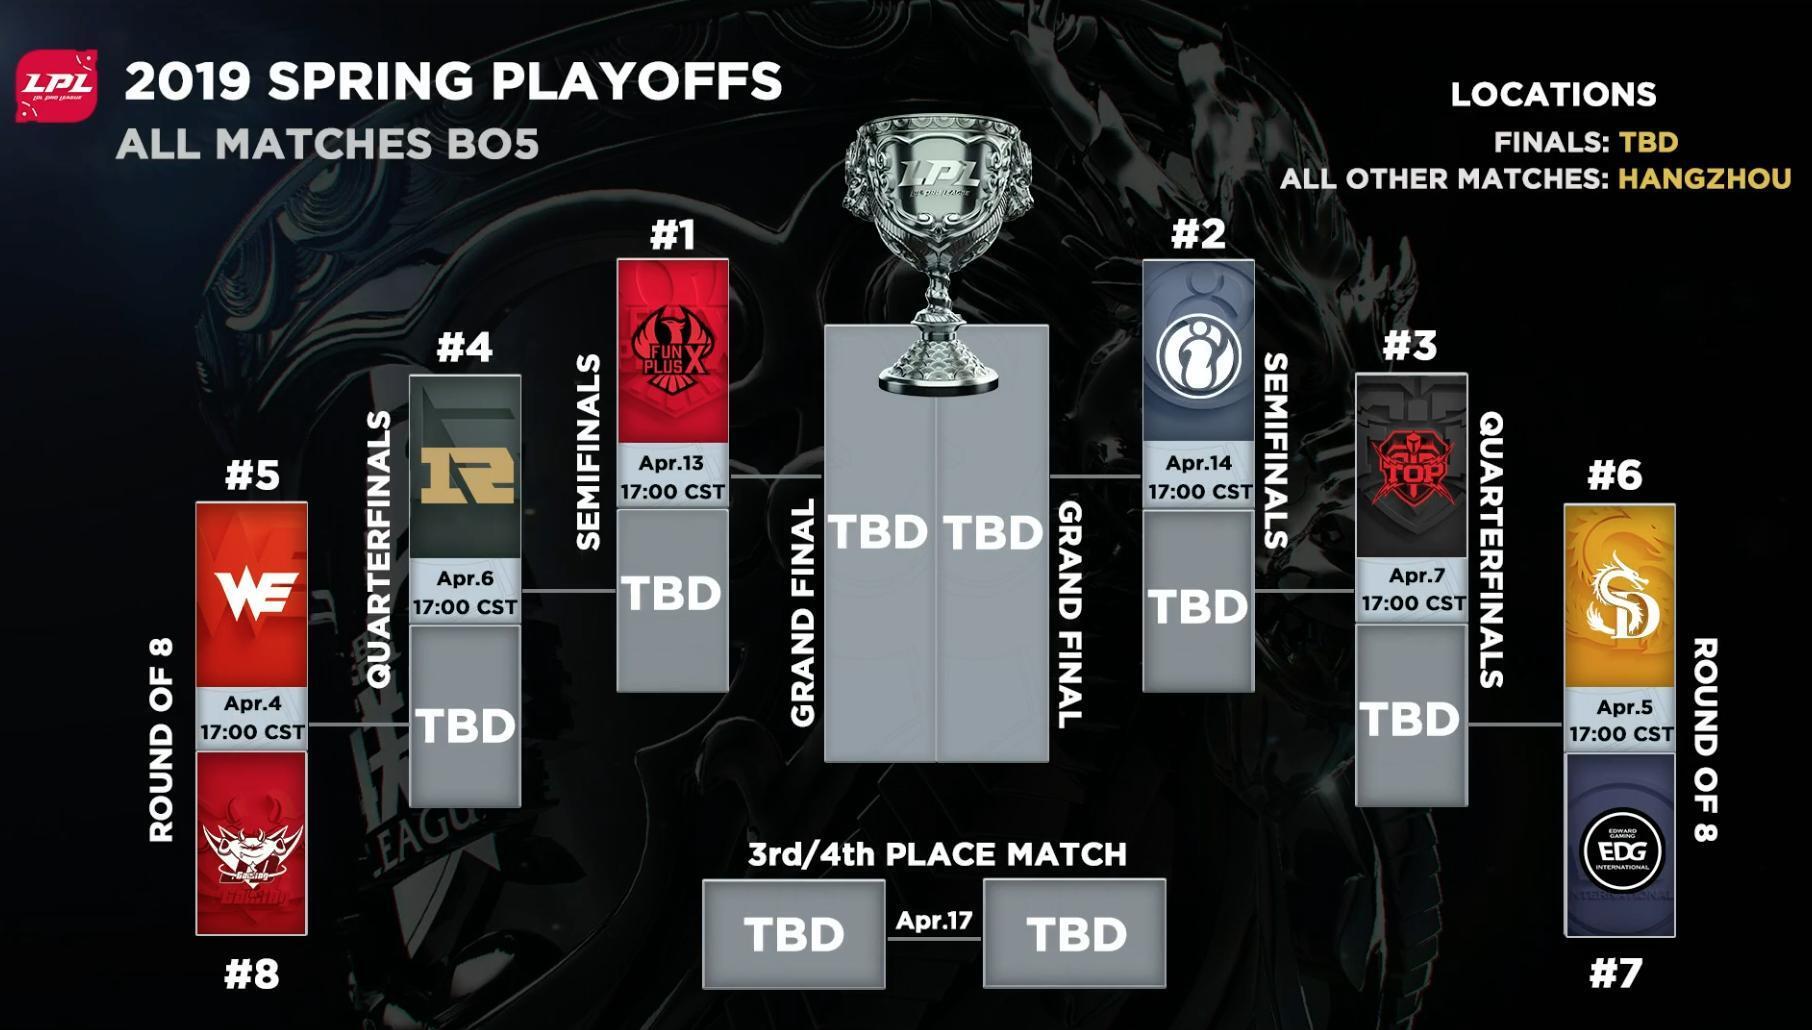 The 2019 LPL Spring Playoffs will see eight teams will compete for a ¥3,500,000 prize pool and be crowned Spring Split champions in Chongqing, China.